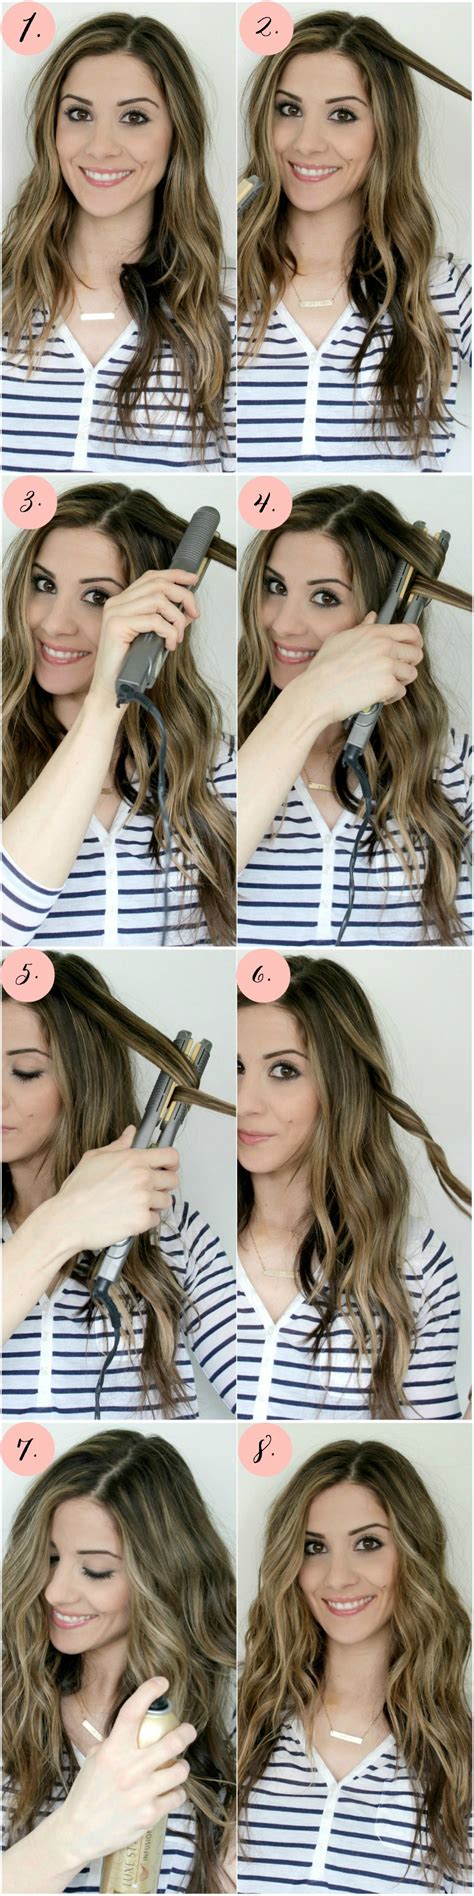 how to curl your hair with a straightener step by step portugal save 39 ph